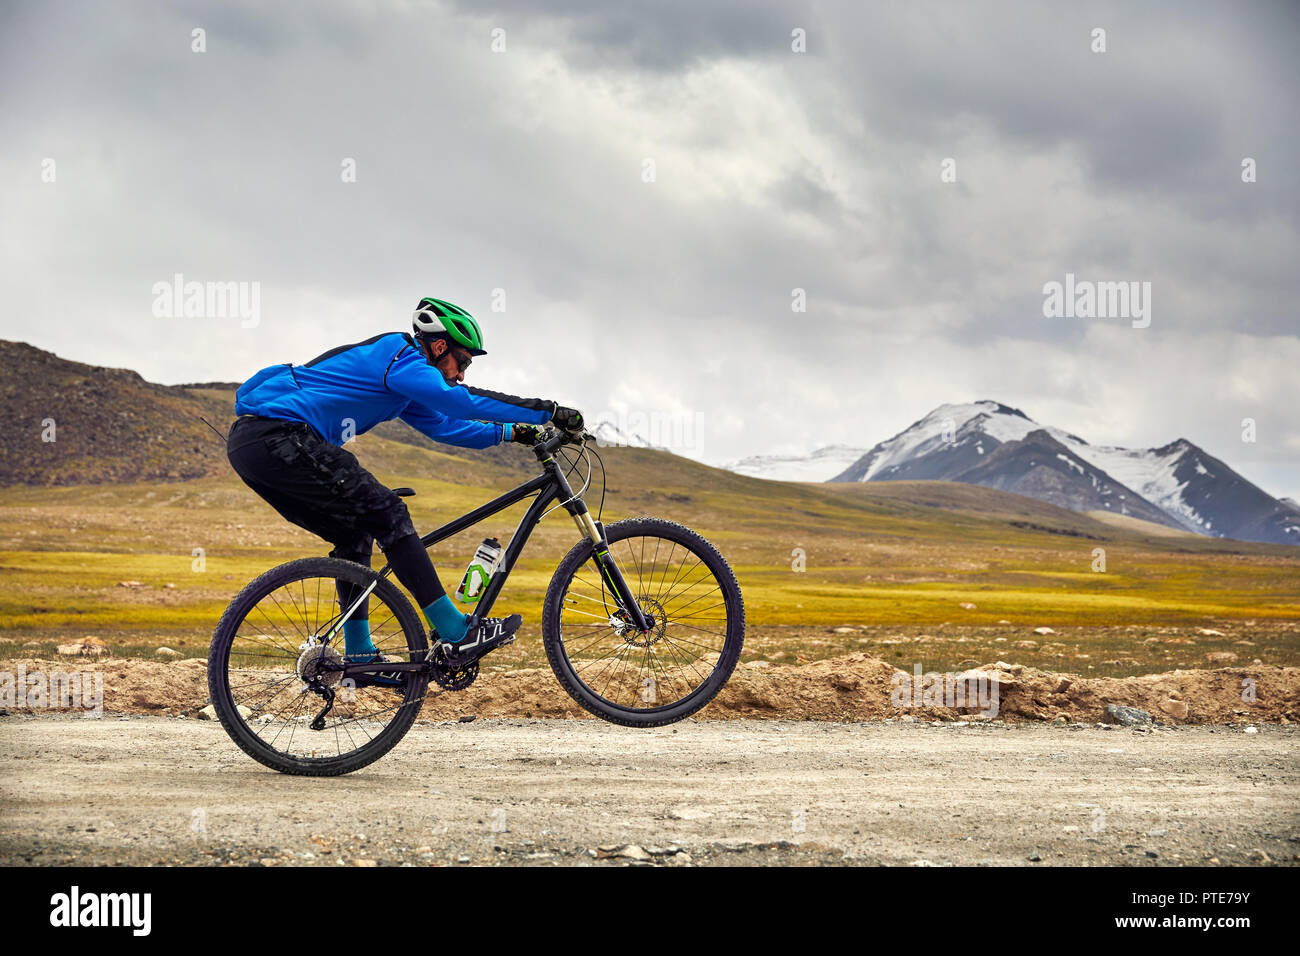 Man on mountain bike rides on the road in the high mountains against overcast sky background. Stock Photo